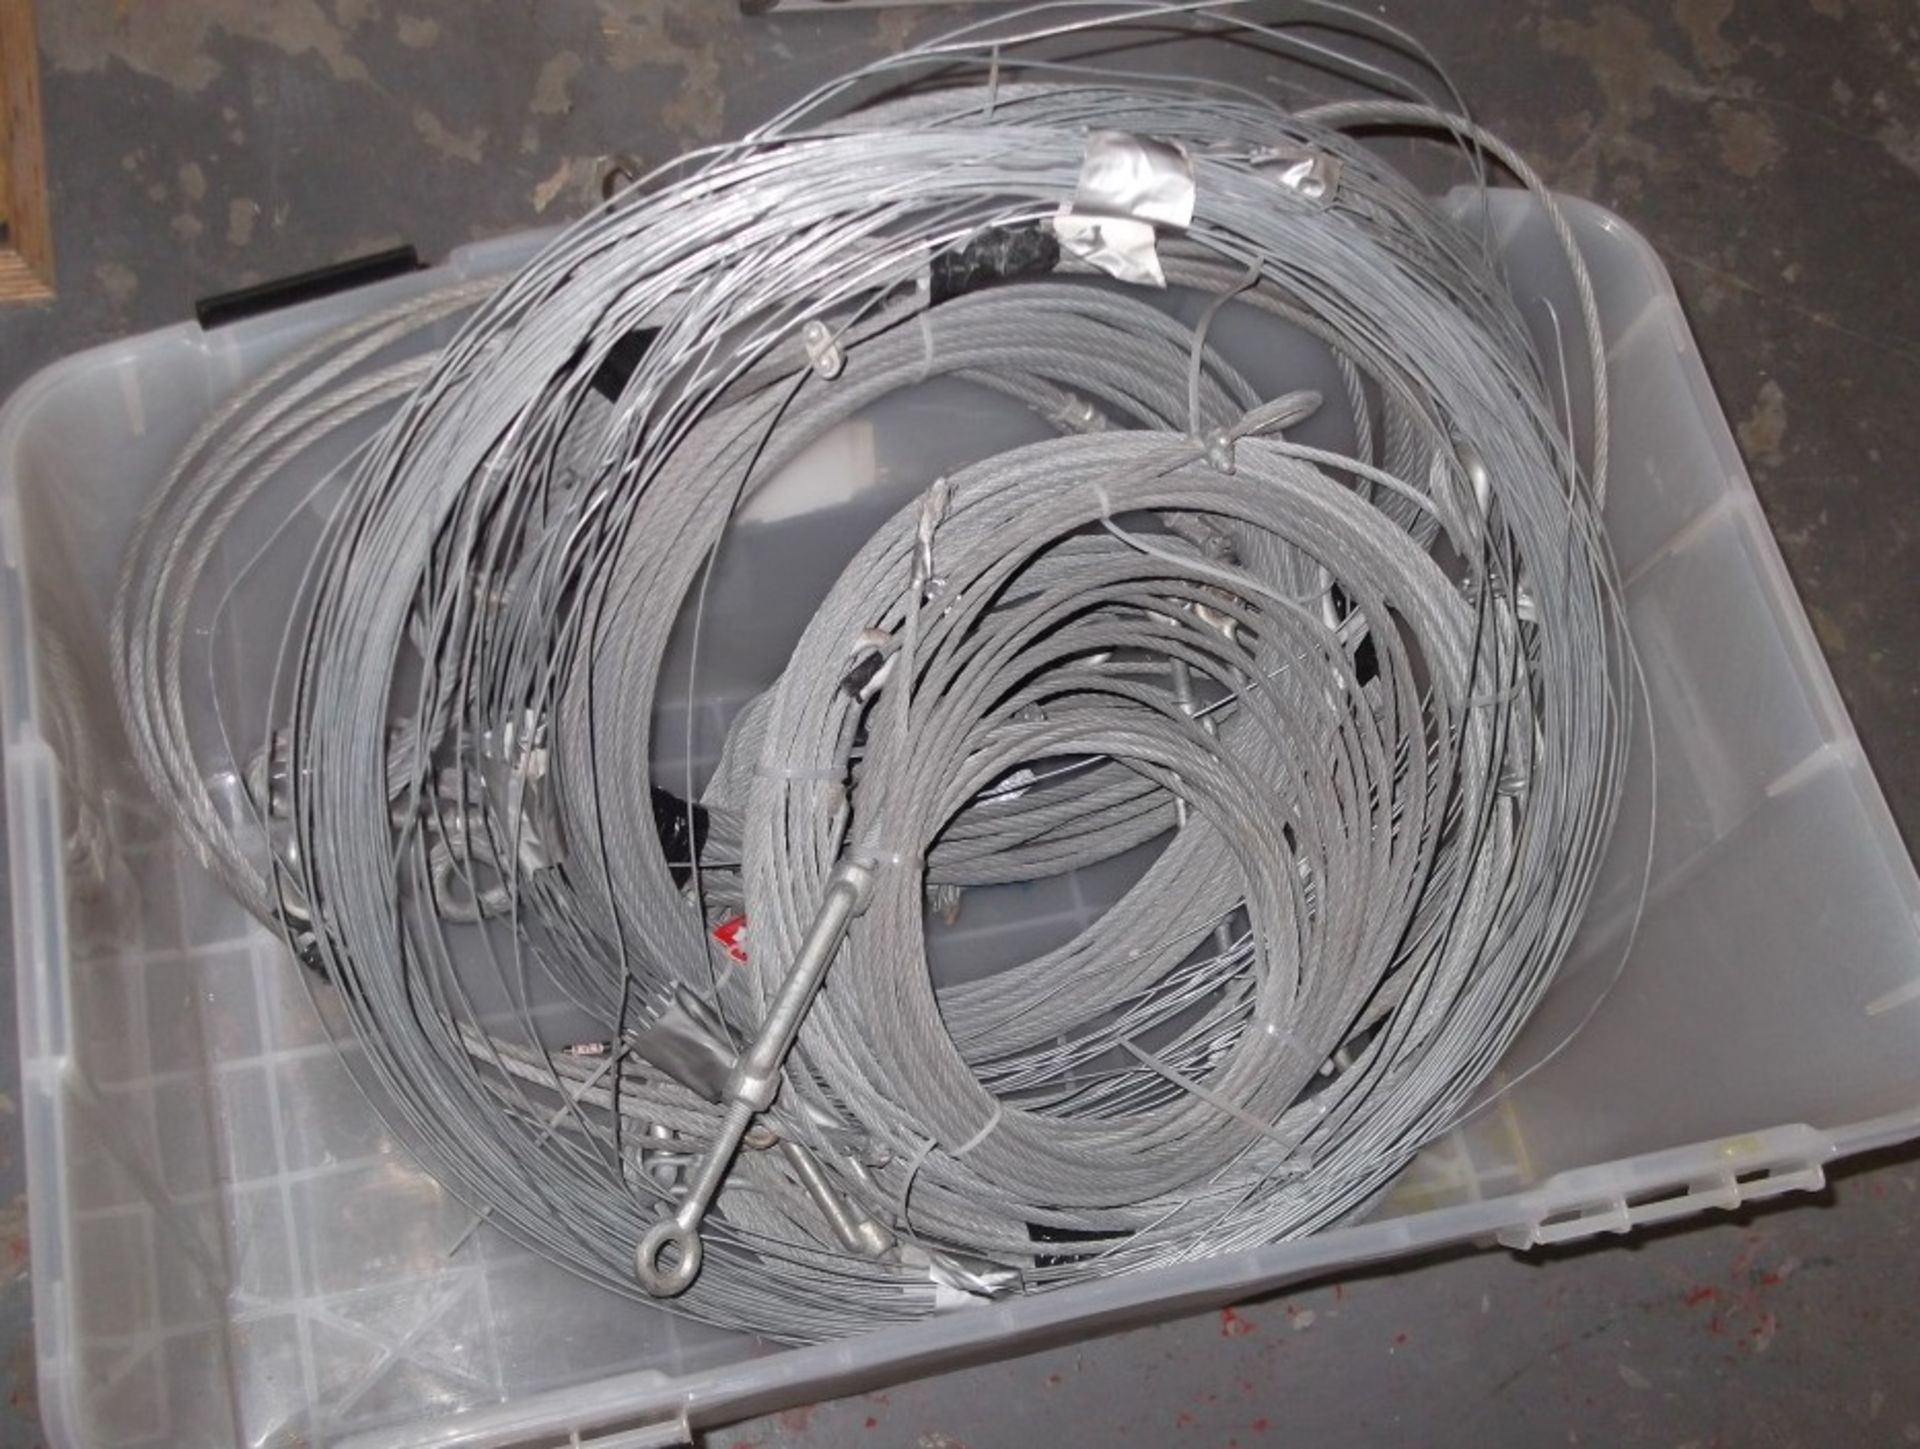 9 x Assorted Coils Of Catenary Wire - Supplied In A Variety Of Thicknesses And Lengths, Most With - Image 5 of 5